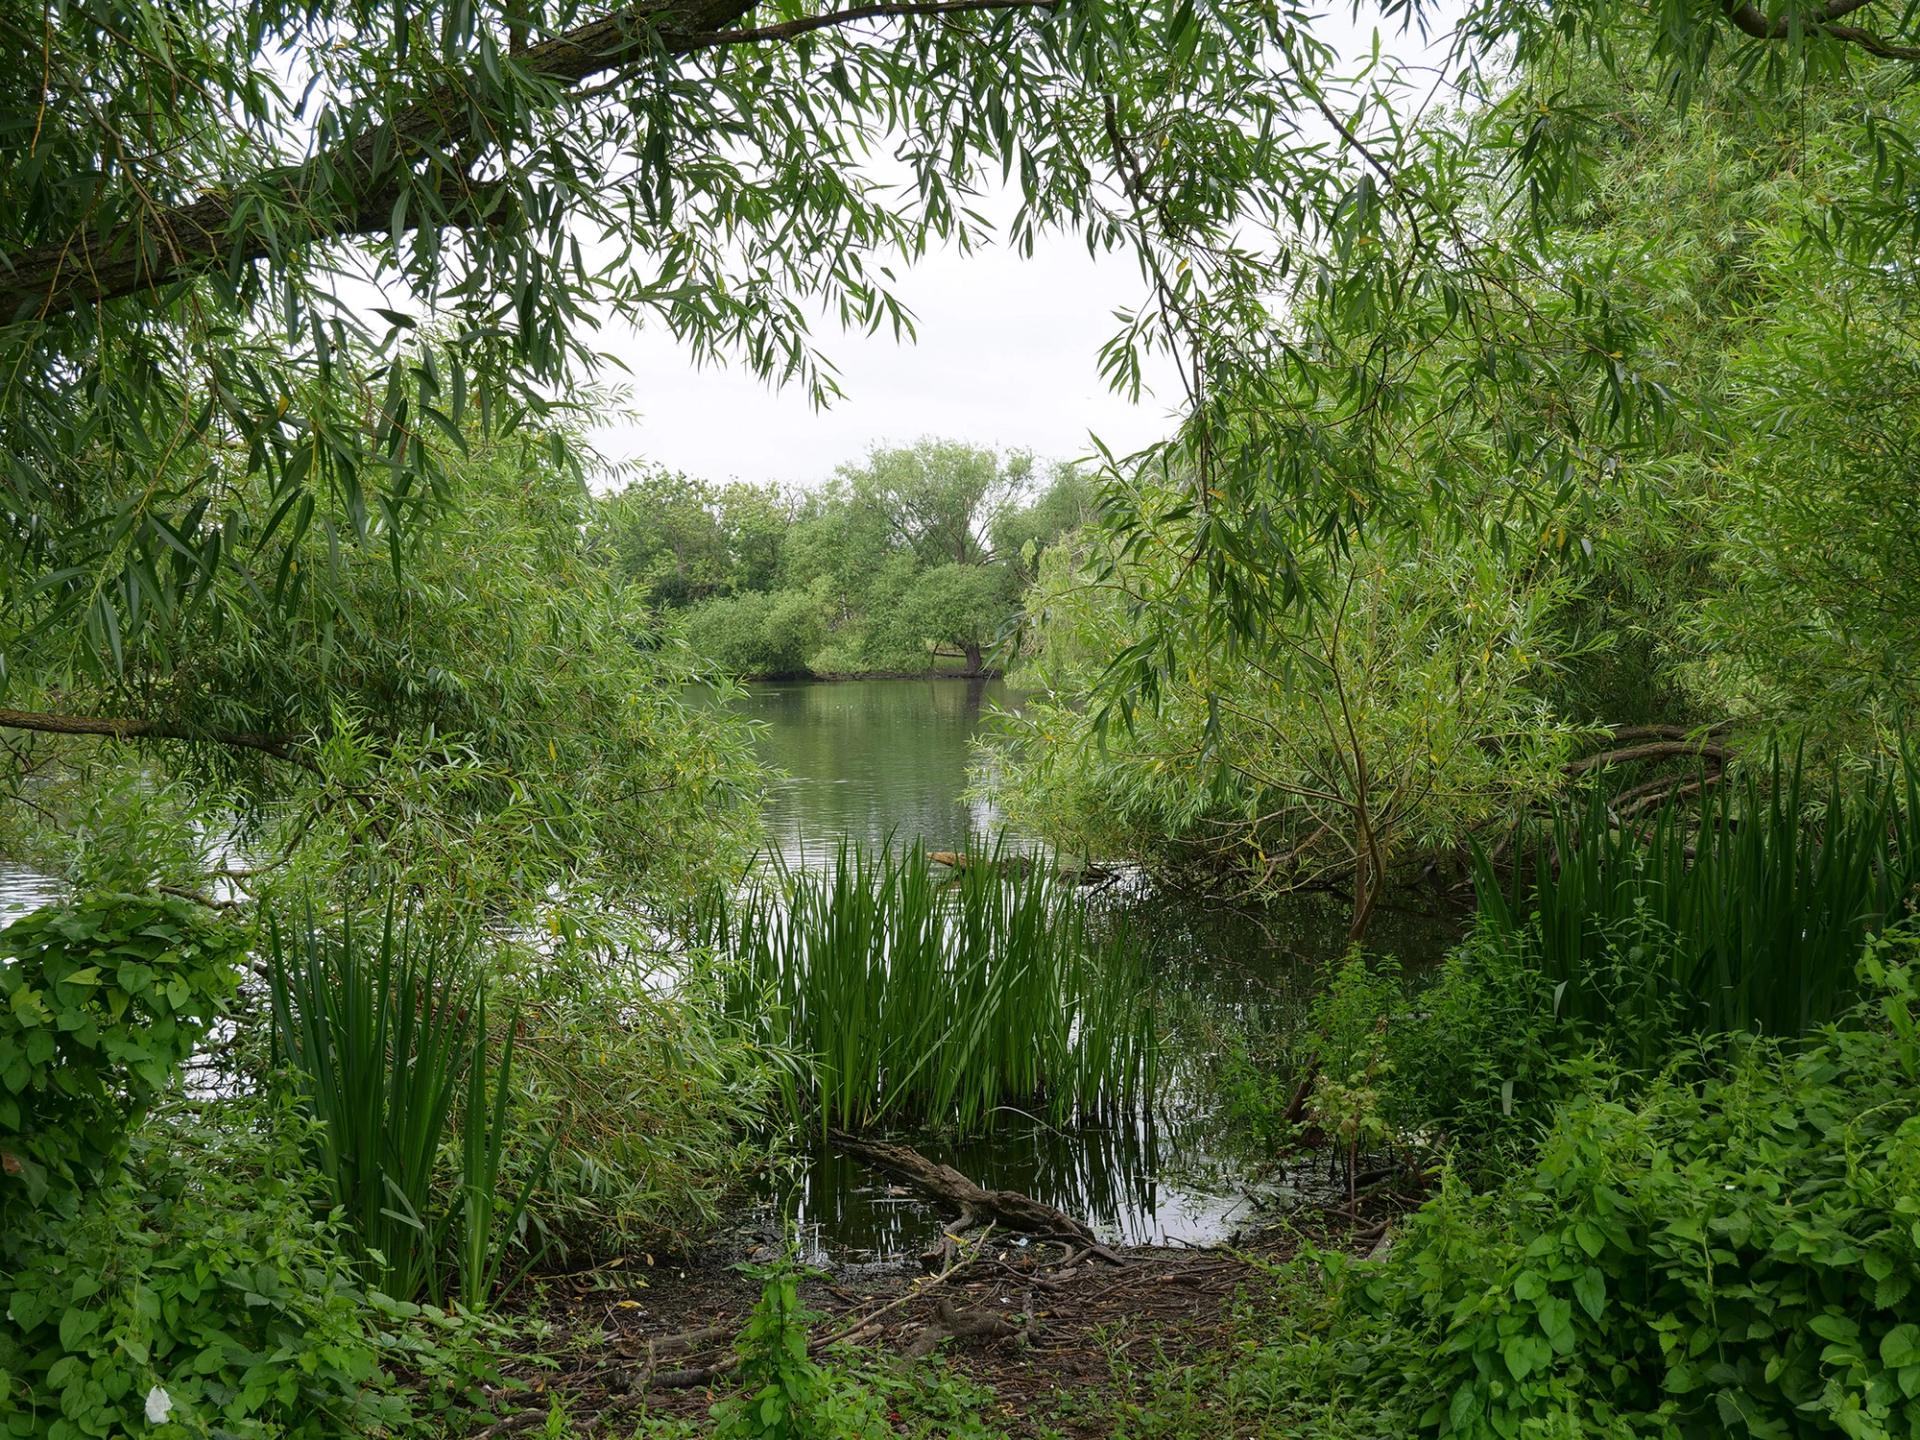 View of the pond in Parsloe Park